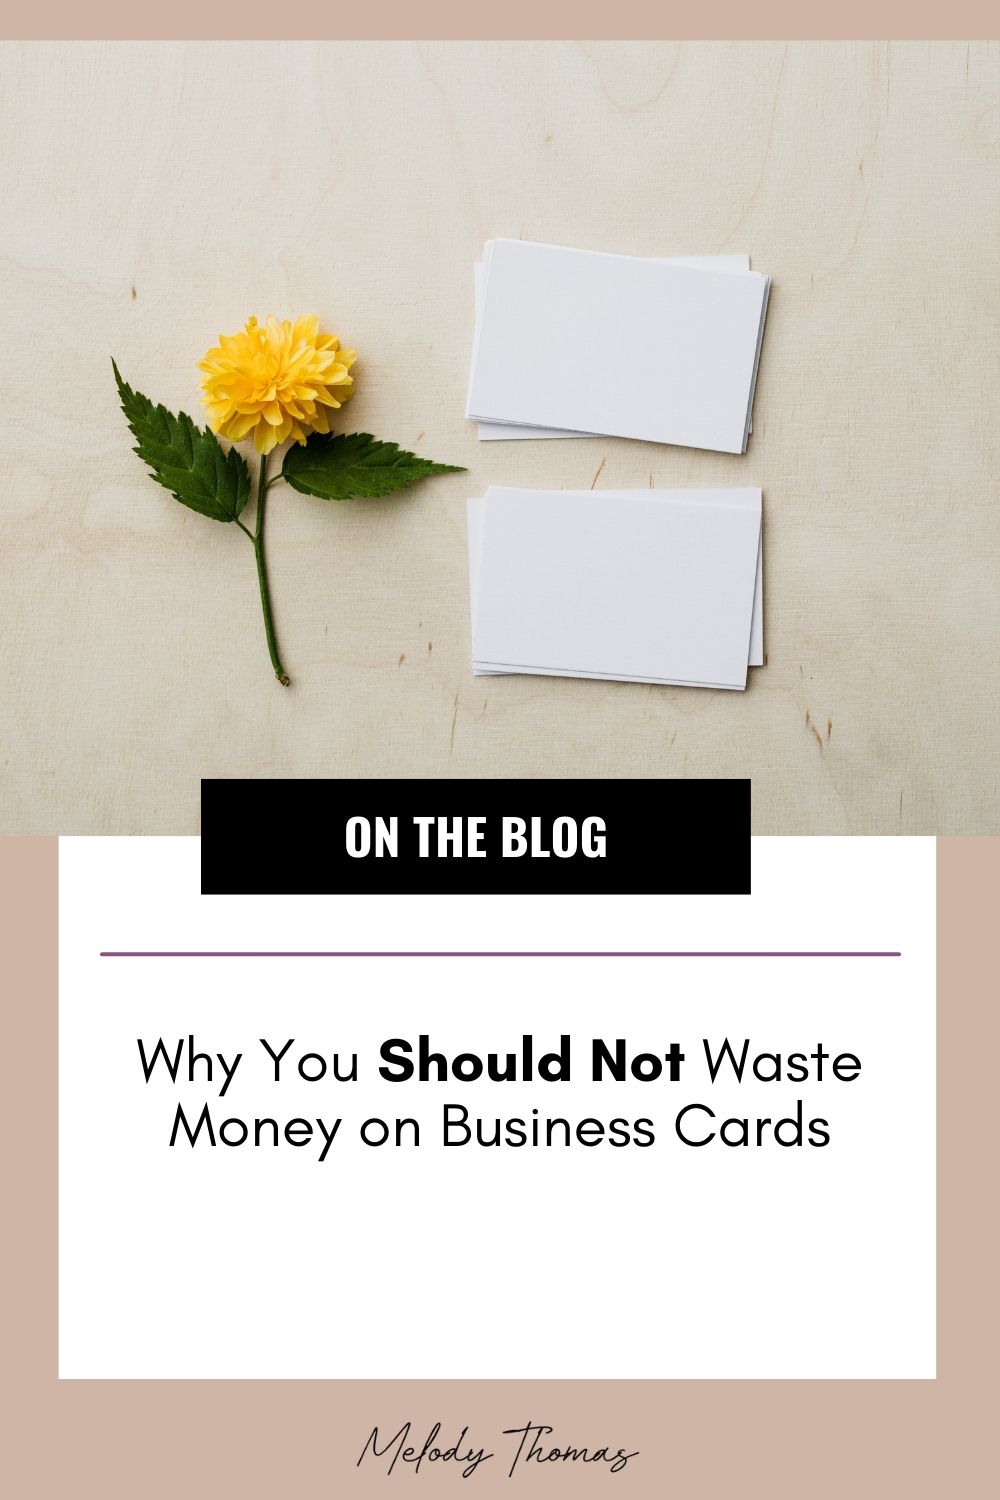 Why You Should Not Waste Money on Business Cards